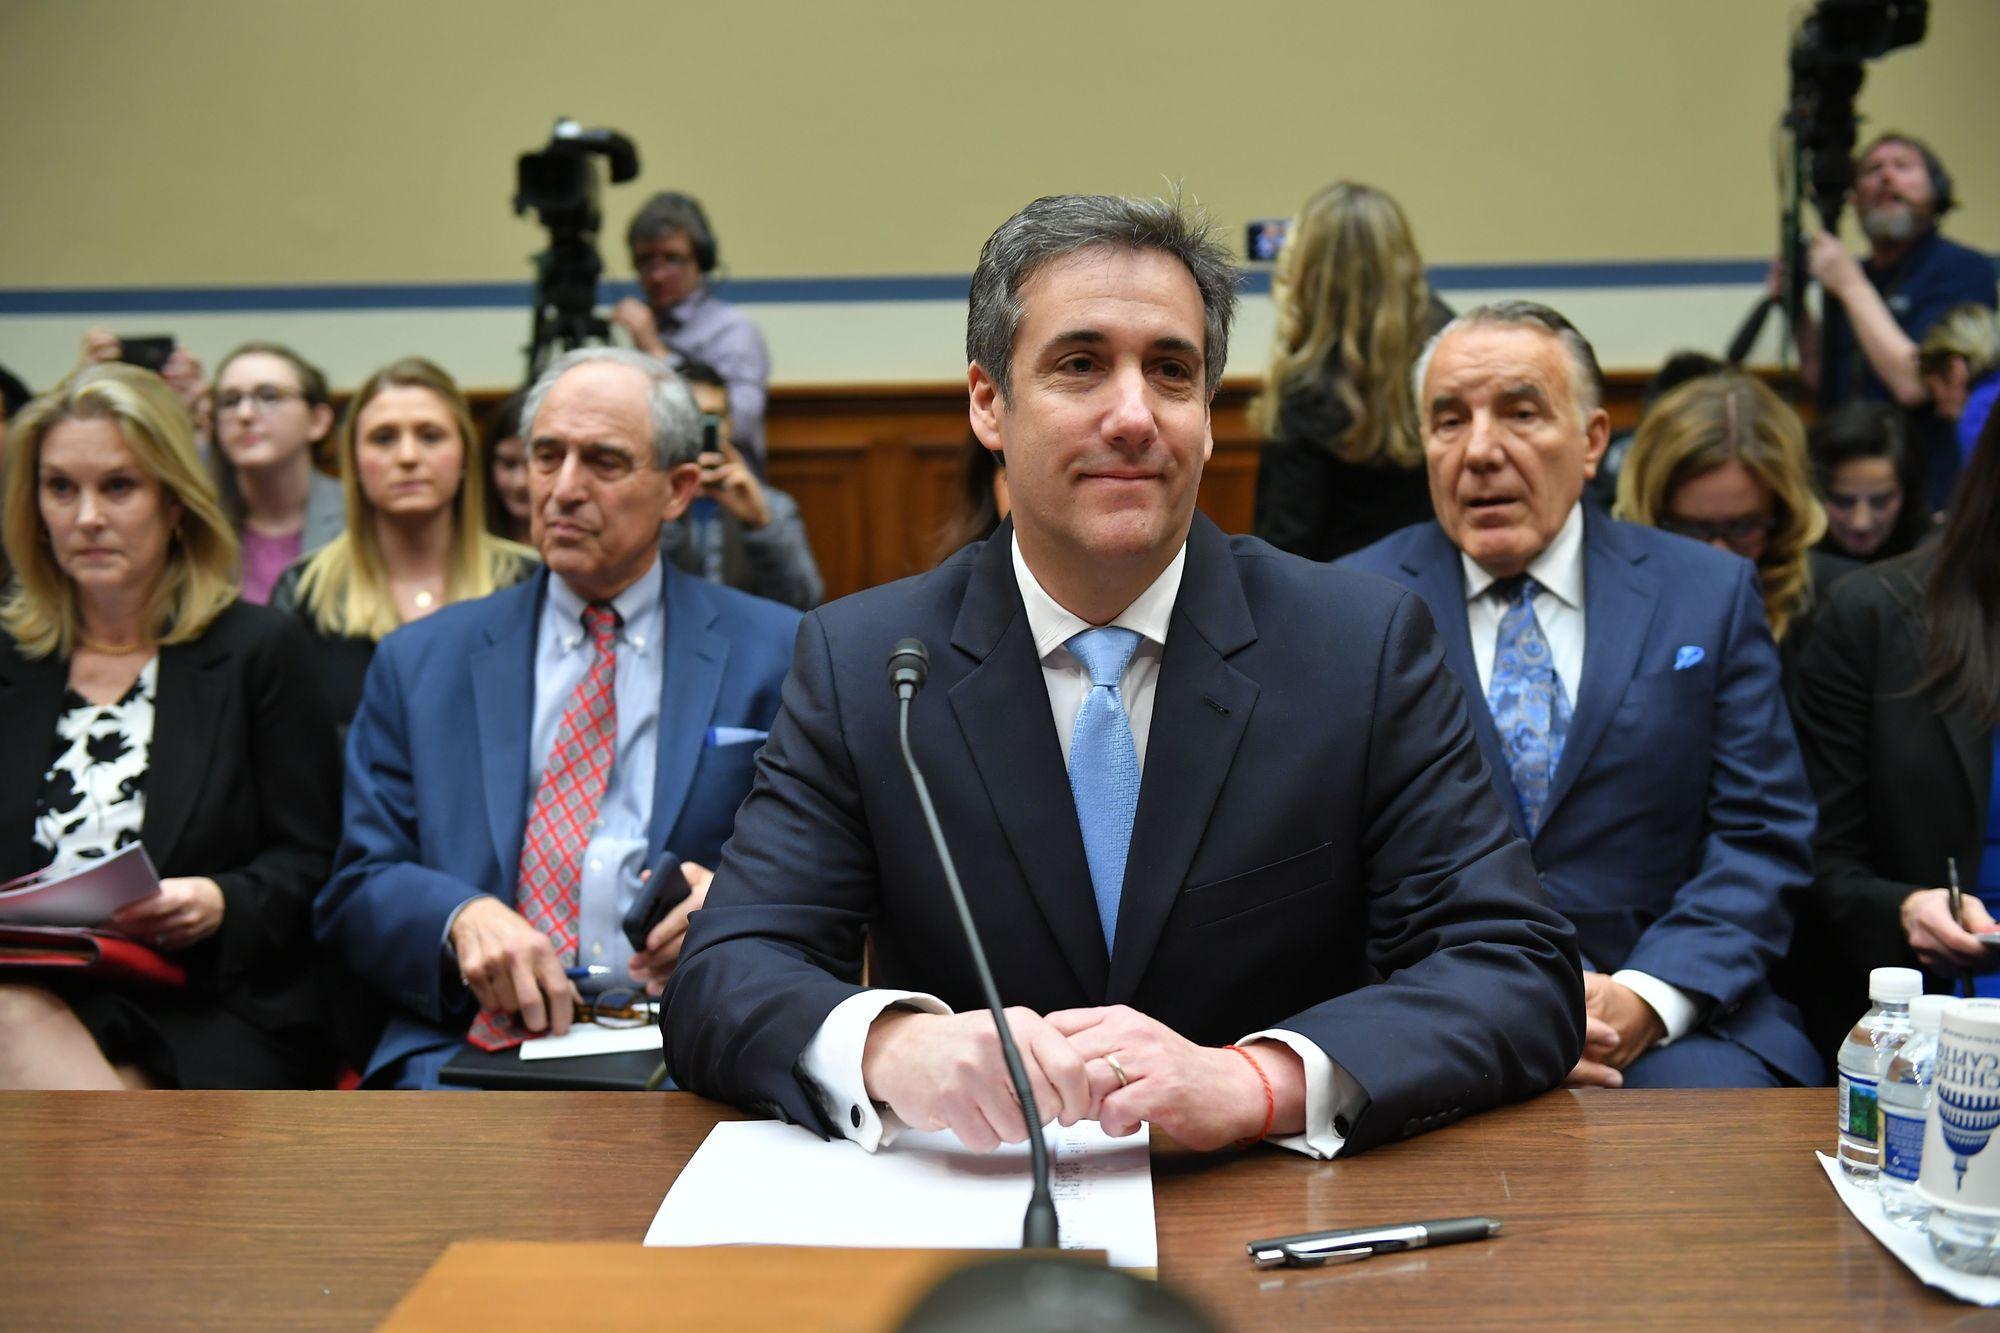 Michael Cohen, US President Donald Trump's former personal attorney, arrives to testify before the House Oversight and Reform Committee in the Rayburn House Office Building on Capitol Hill in Washington, DC on February 27, 2019. (Photo by MANDEL NGAN / AFP)